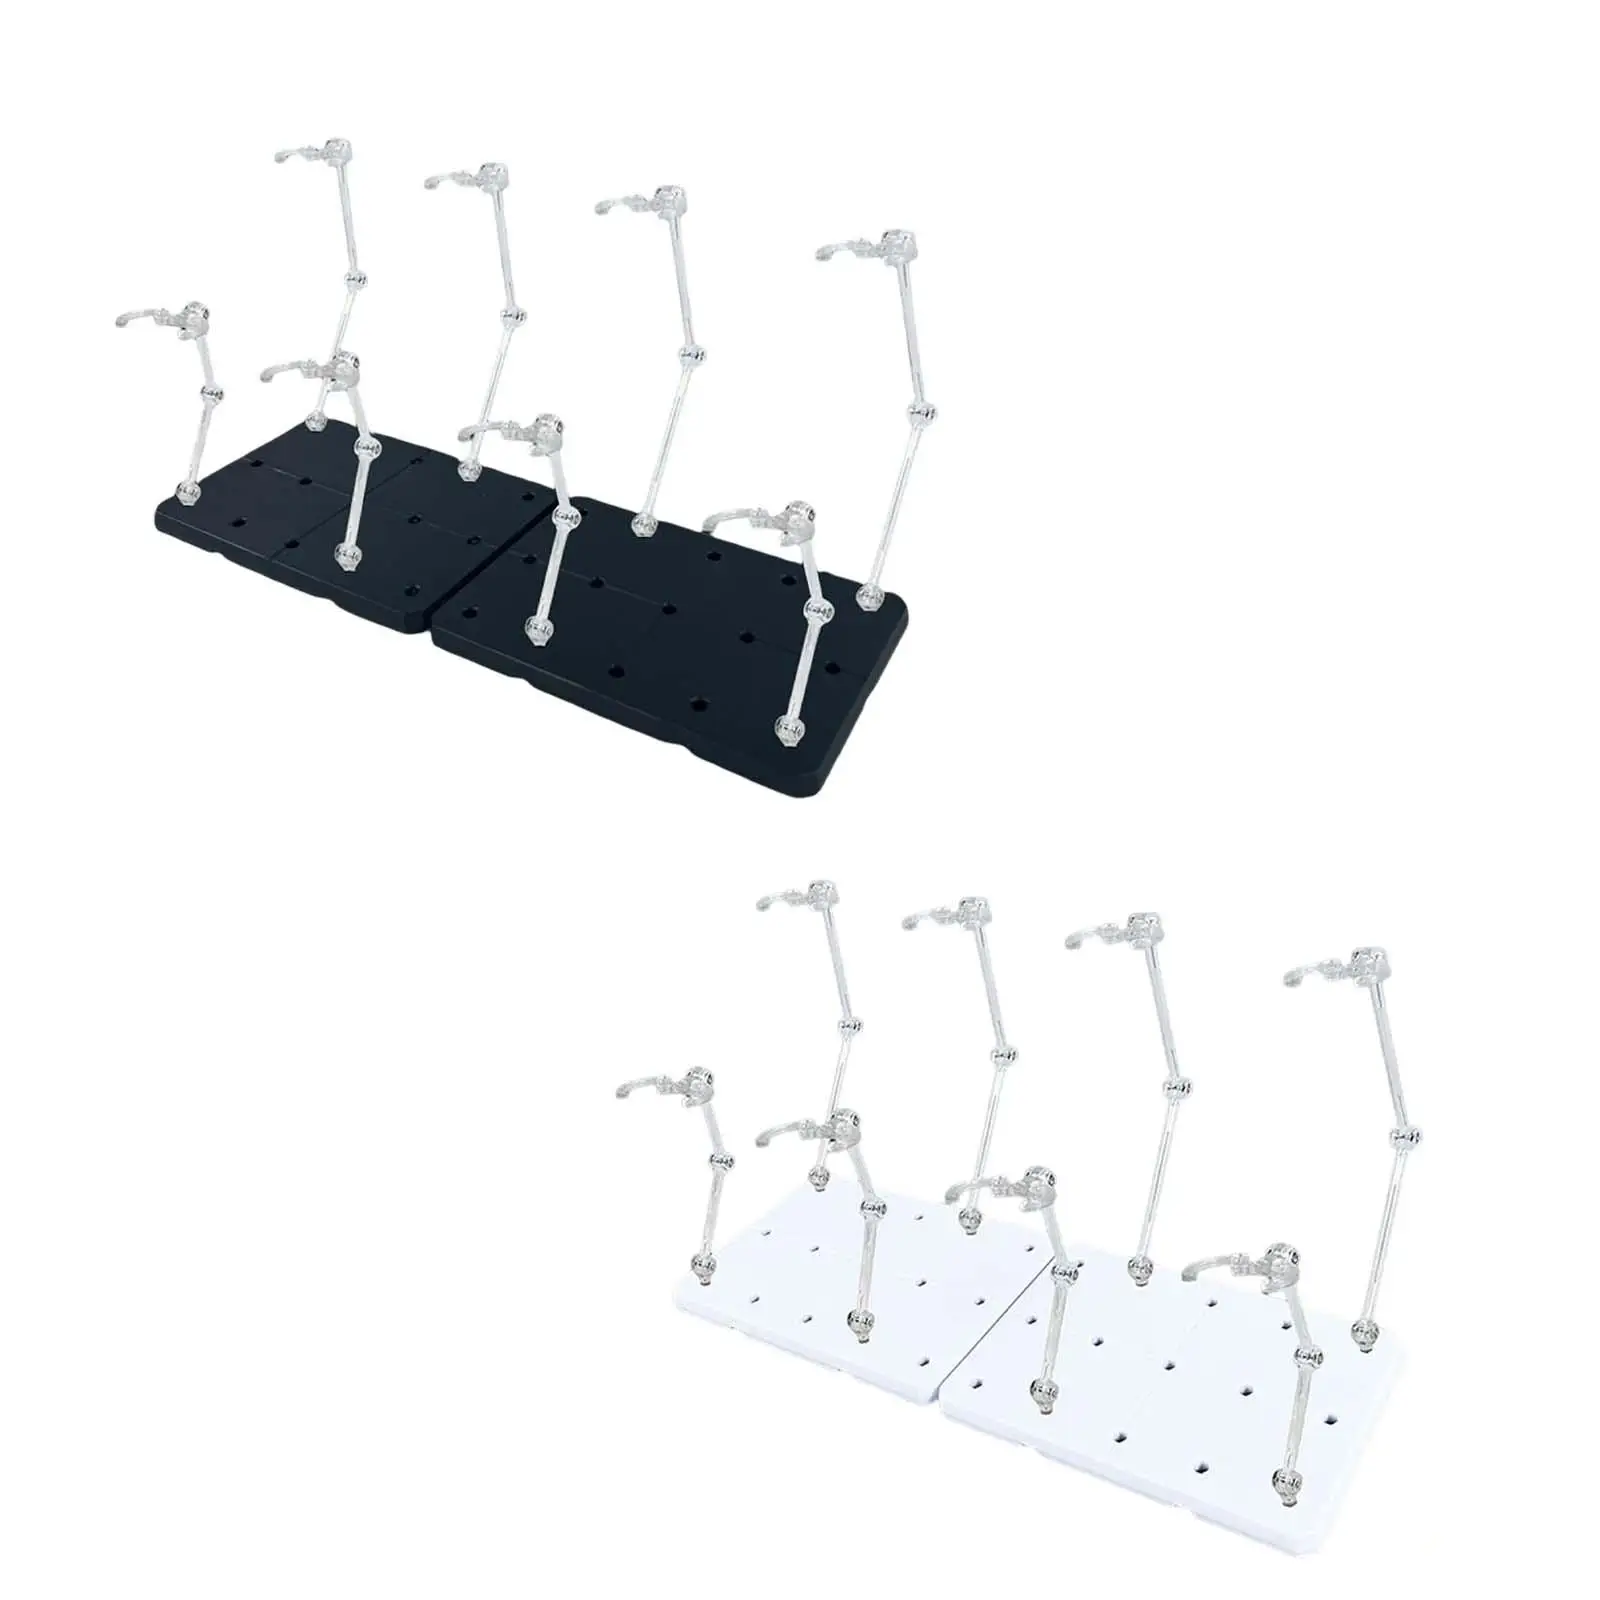 Model Stand Holder Action Figures Holders Rack Stent for 1:100 Scale 1:144 Scale Models Accessories Parts Collection